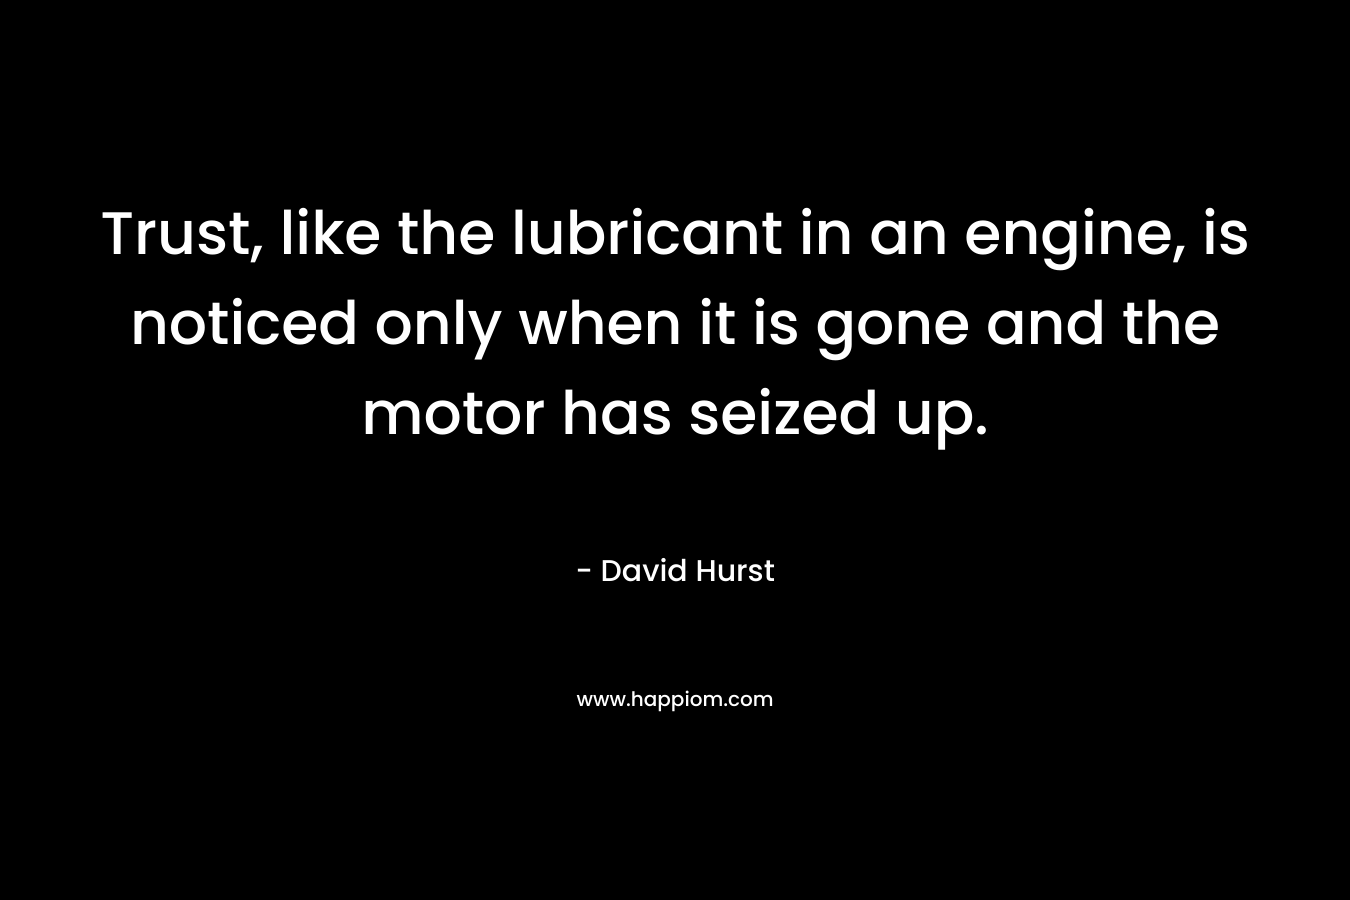 Trust, like the lubricant in an engine, is noticed only when it is gone and the motor has seized up. – David Hurst